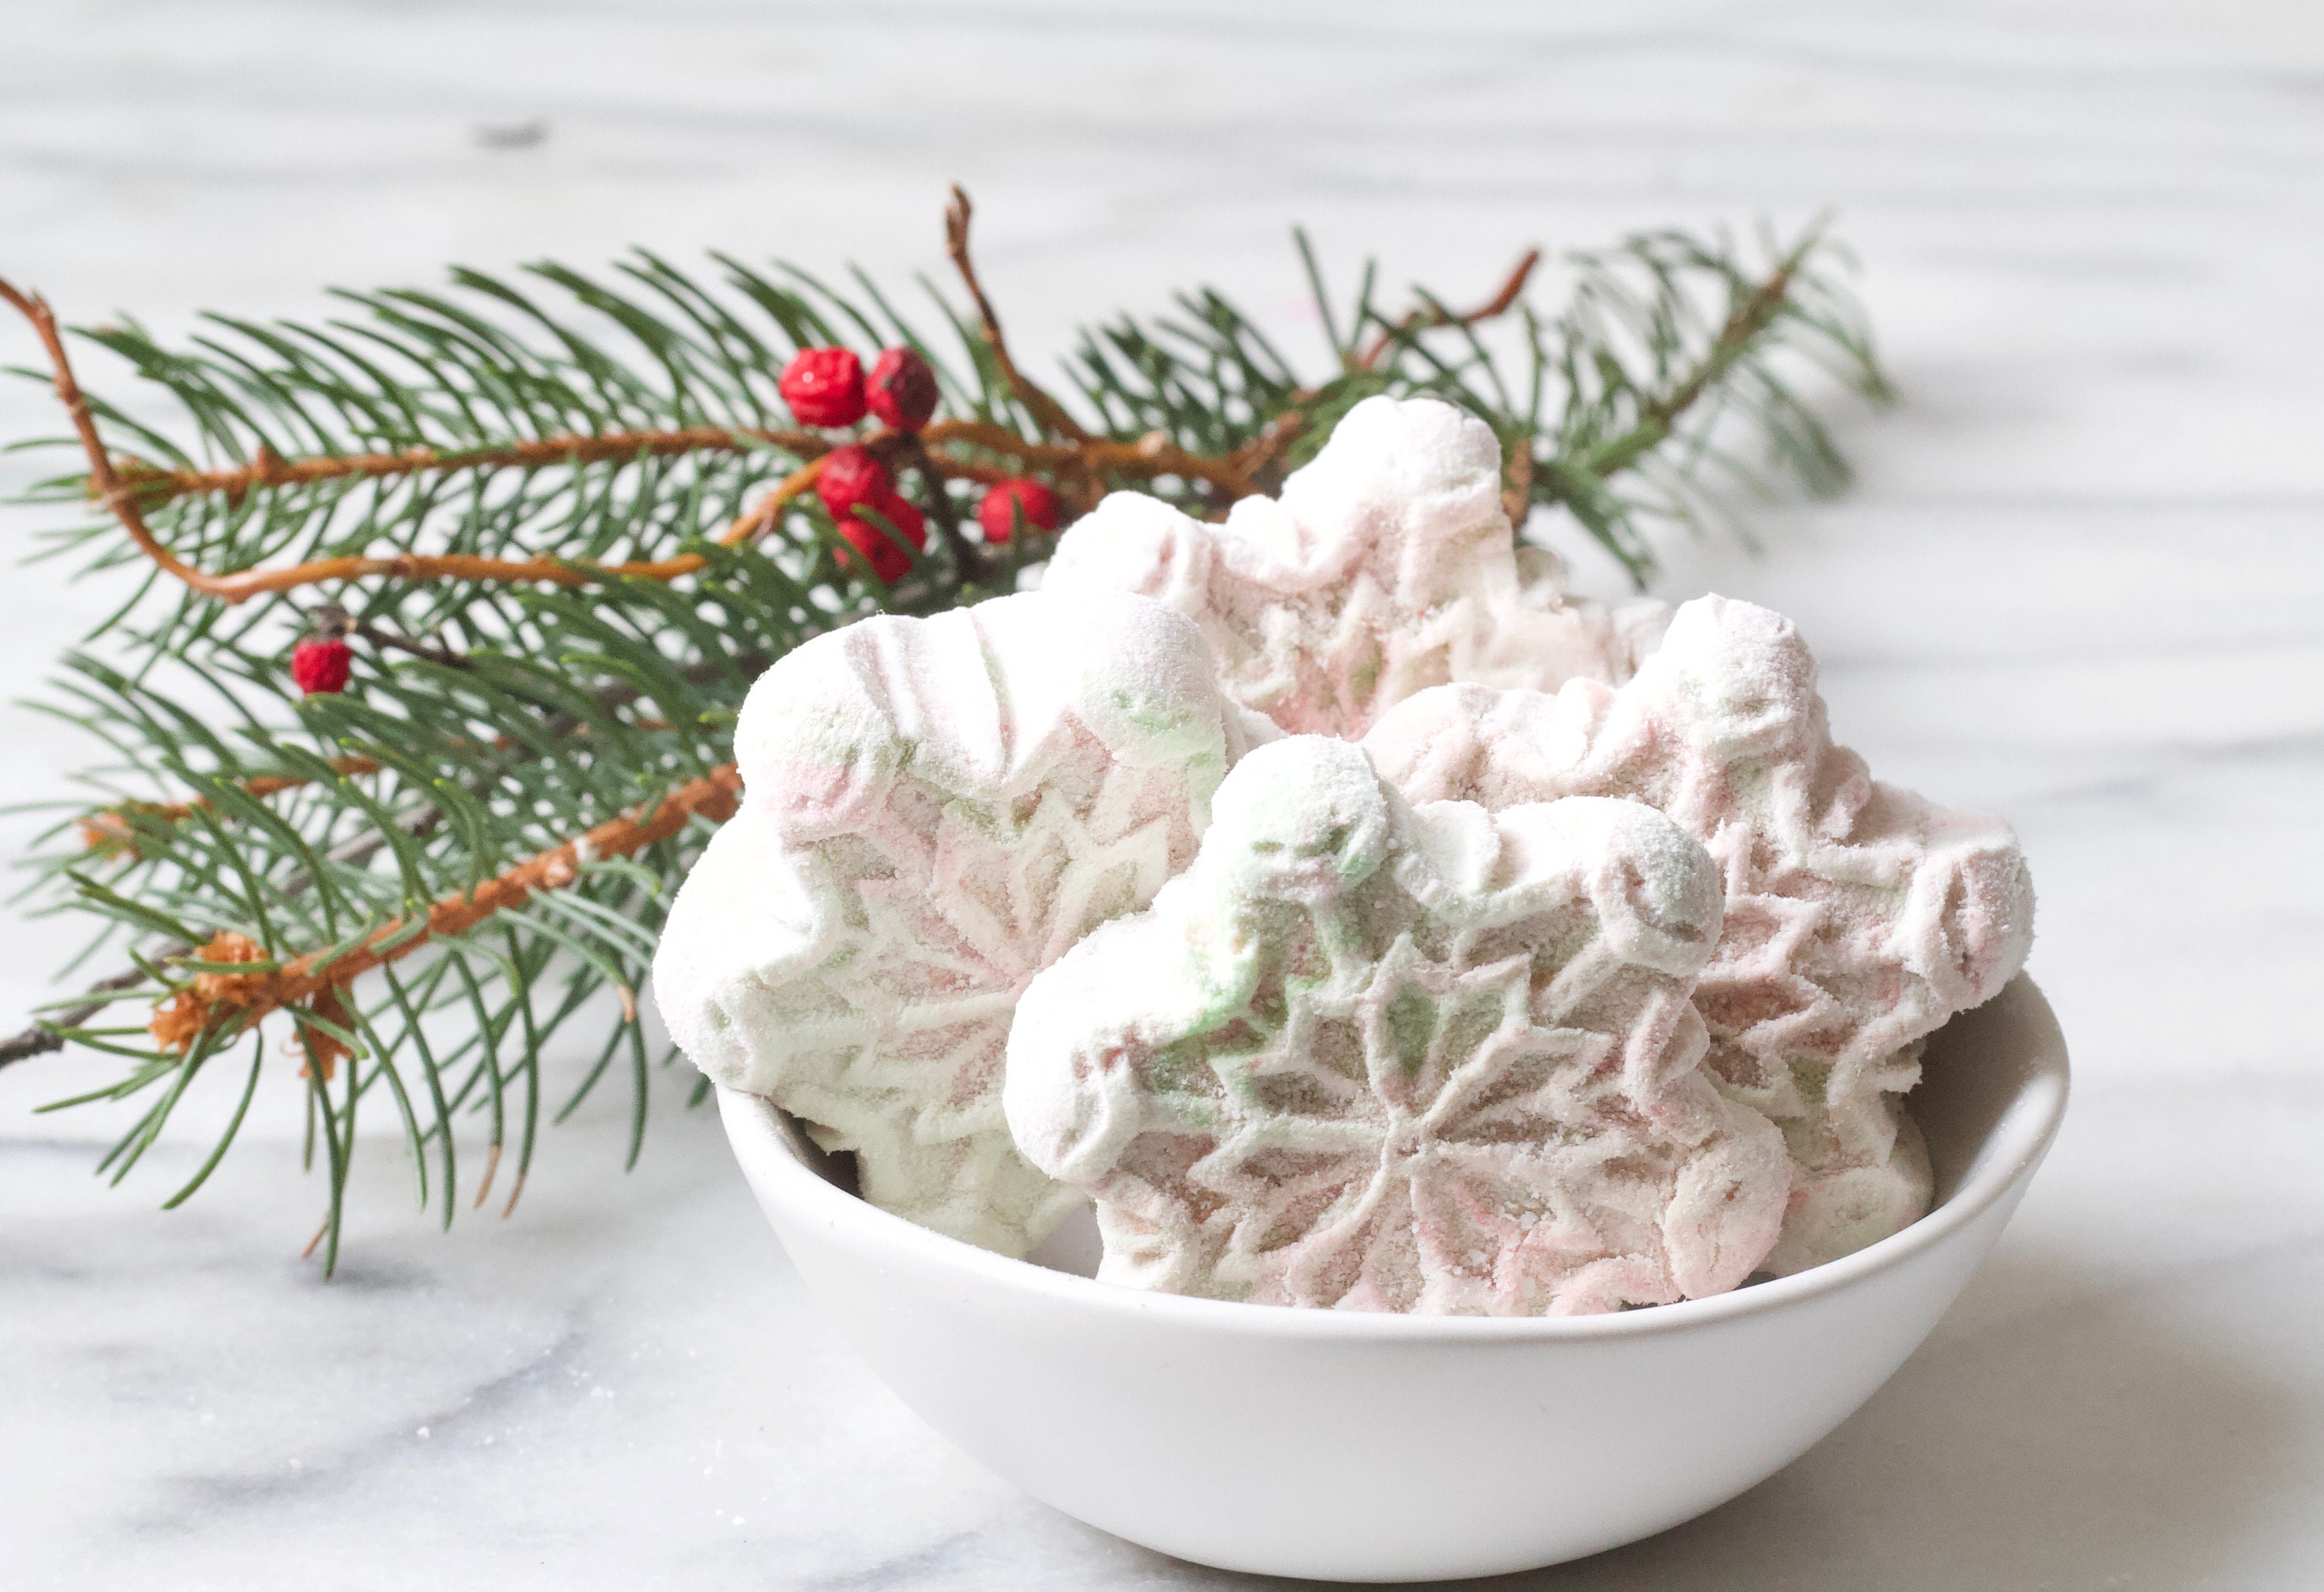 Marshmallow Snowflake Craft -Snow Day Fun! - For the Love of Food